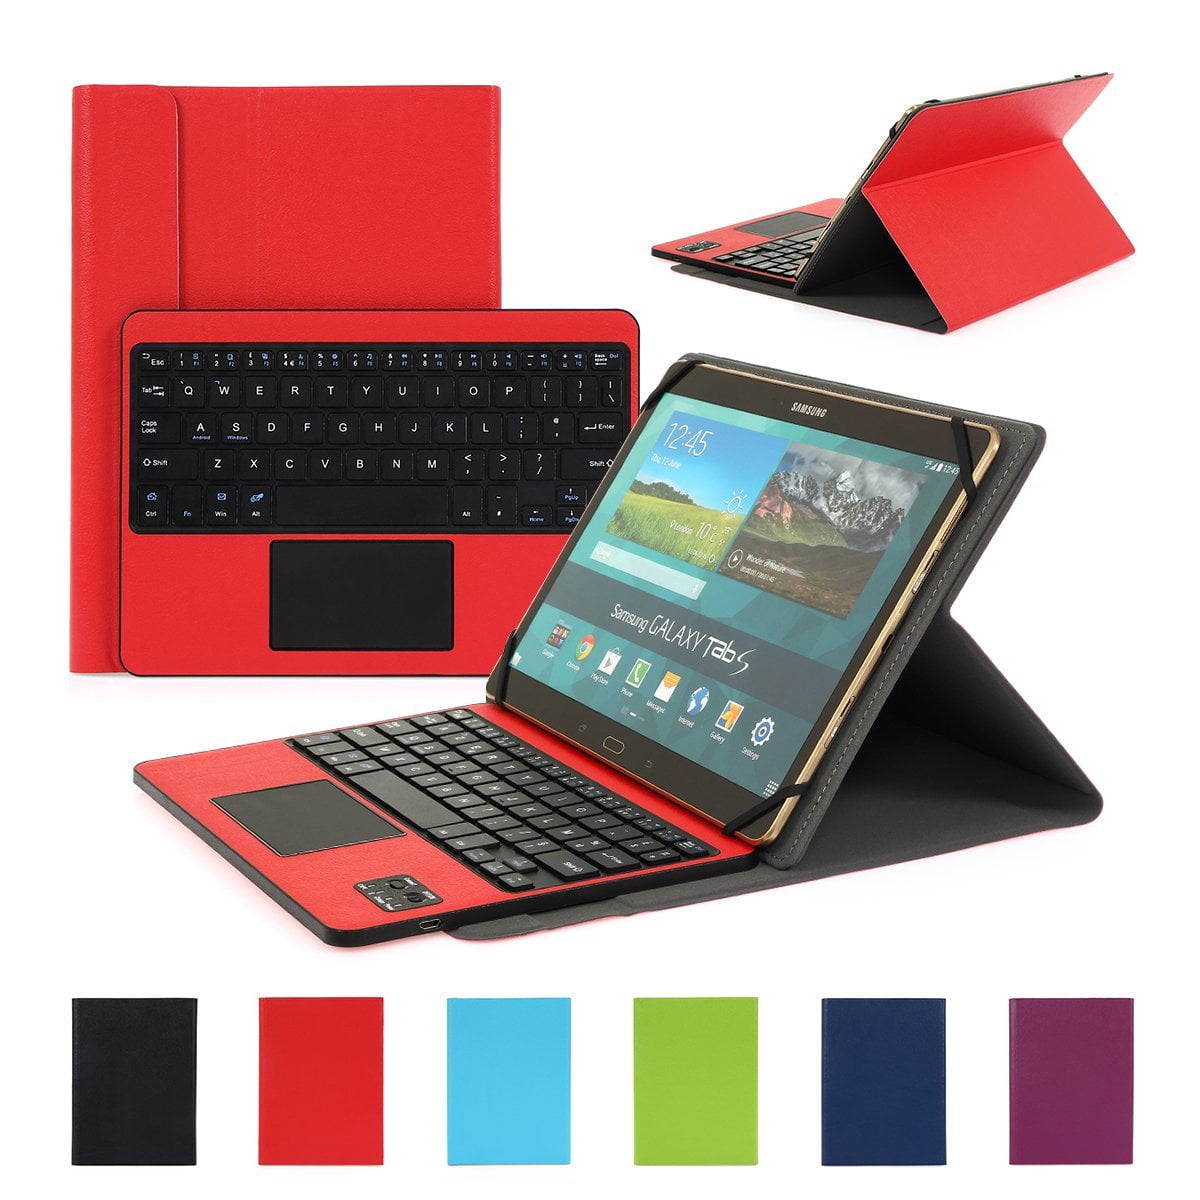 pols meer Titicaca Tulpen CoastaCloud Bluetooth 3.0 Keyboard Red Case for Samsung Galaxy Tab Pro 10.1  Tablet with AZERTY French Layout Removable Keyboard and Touchpad -  Compatible with 10.1 inch Any Android / Windows Tablet - Walmart.com